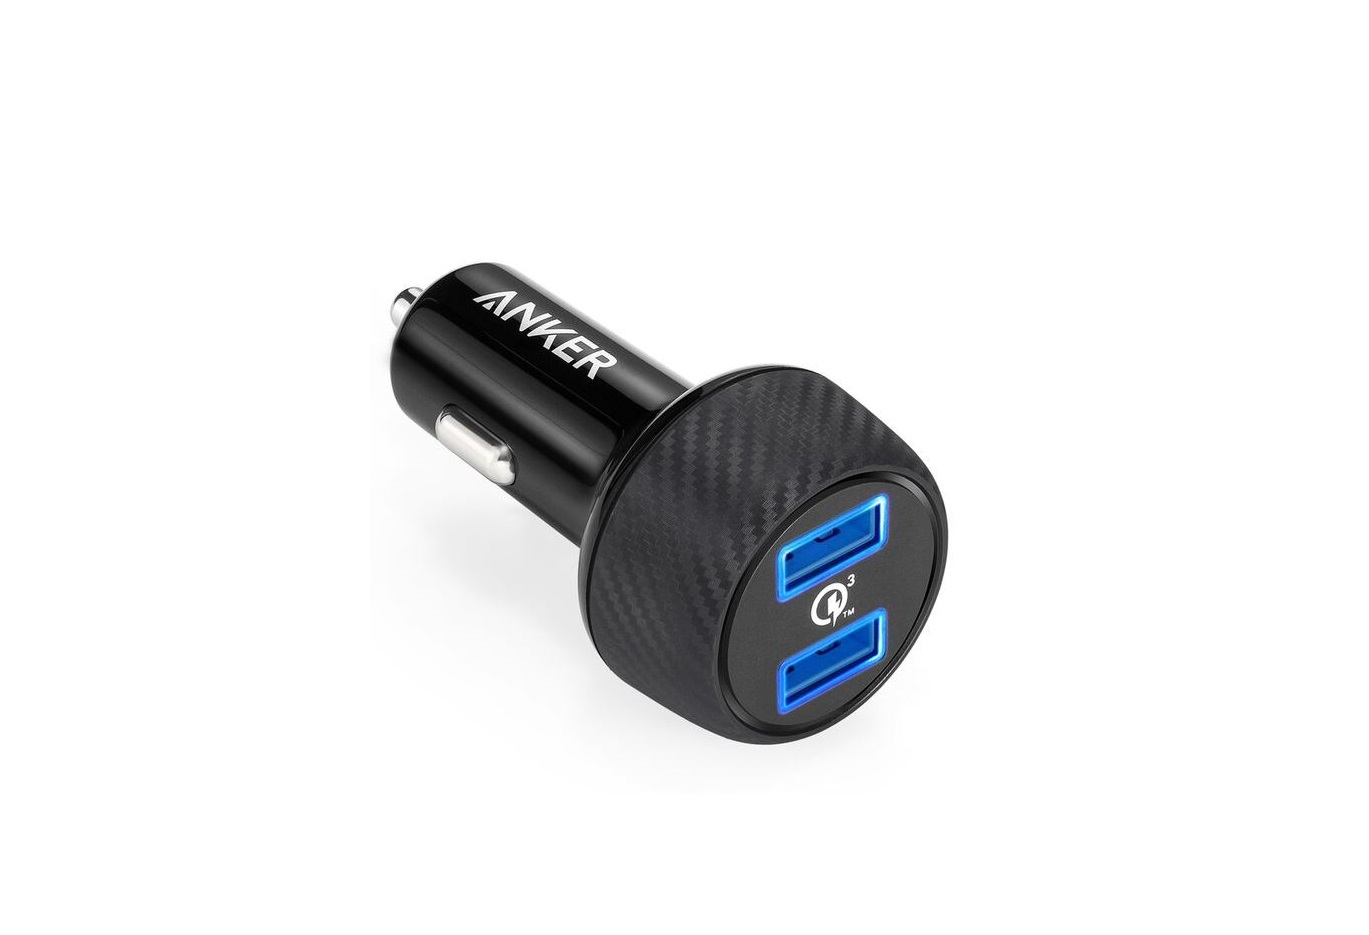 ANKER A2228 PowerDrive Speed 2 3.0 Quick Dual USB Car Charger User Guide